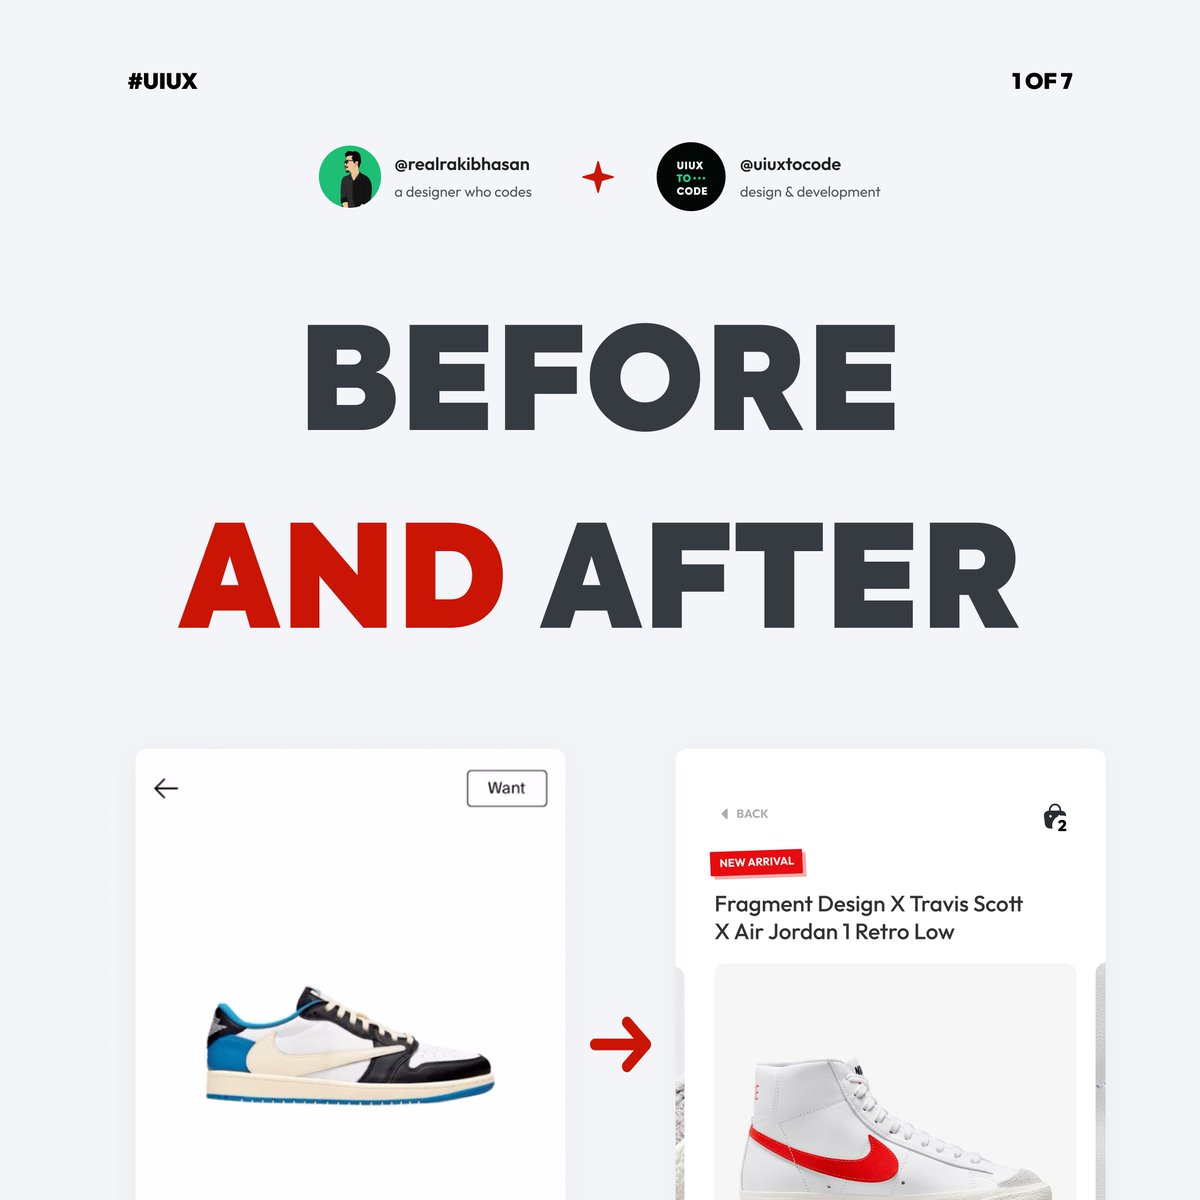 Before and after implementing UX into an existing design!

Say Hello 👋 
zaap.bio/uiuxtocode

Stay tuned for daily design-related resources 🤝

#ui #ux #uxdesign #uidesign #learnui #learnux  #redesignchallenge #realrakibhasan #uiuxtocode